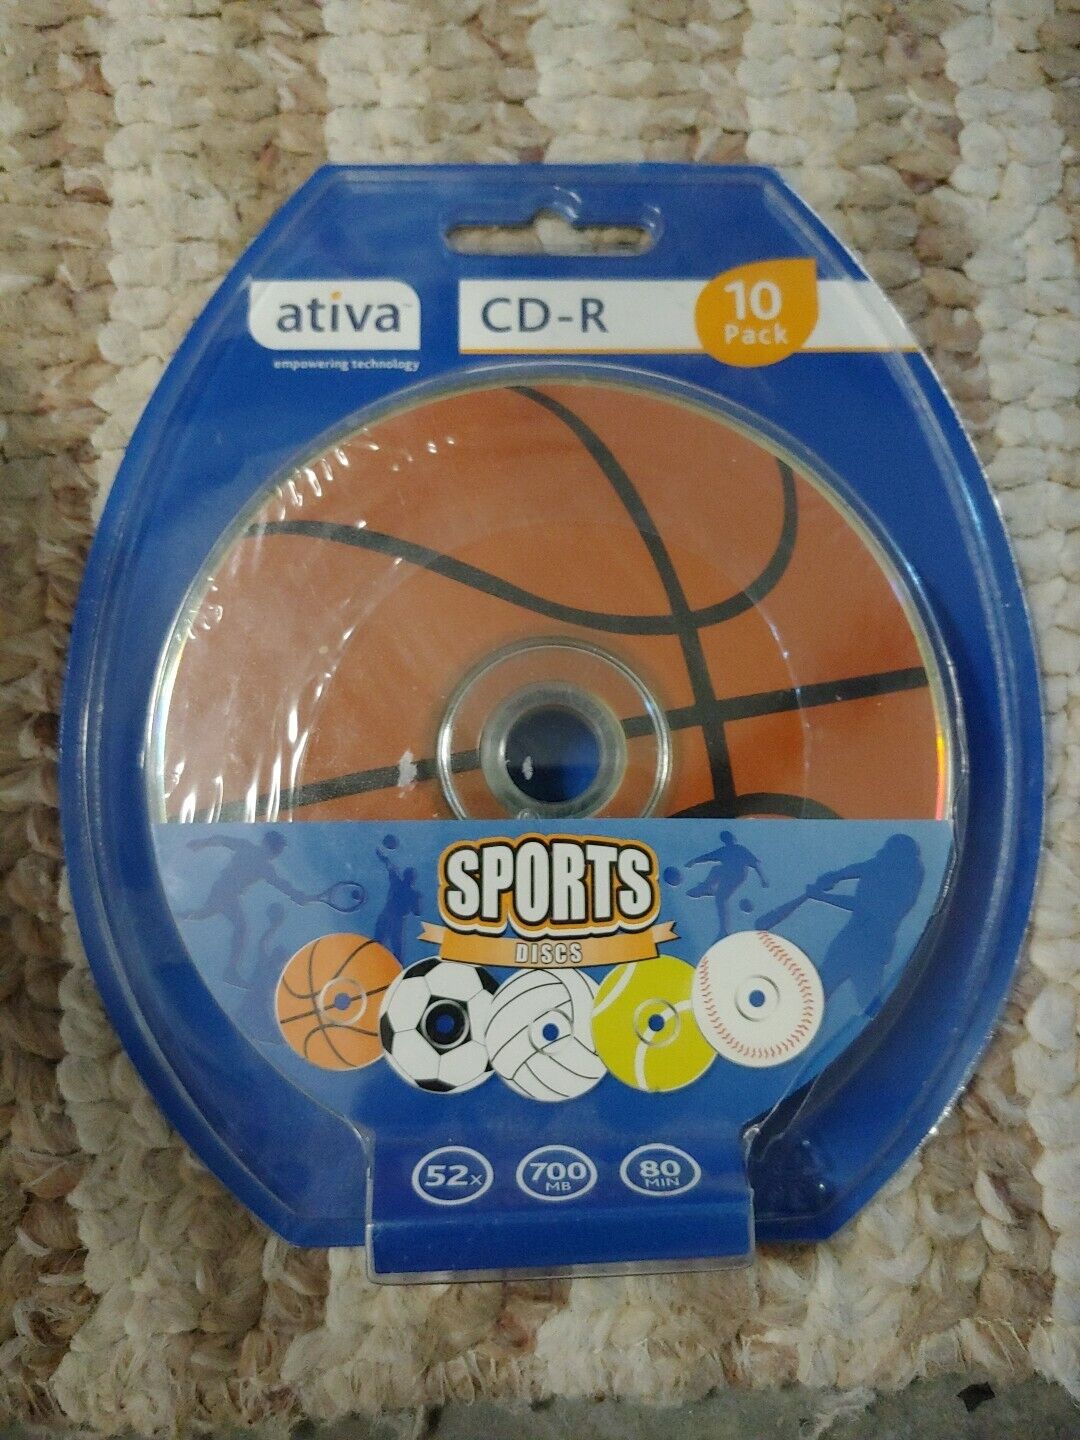 2007 Ativa Sports Themed CD-R 10 Pack - Speed 52x, Storage 700MB or 80 Minutes 